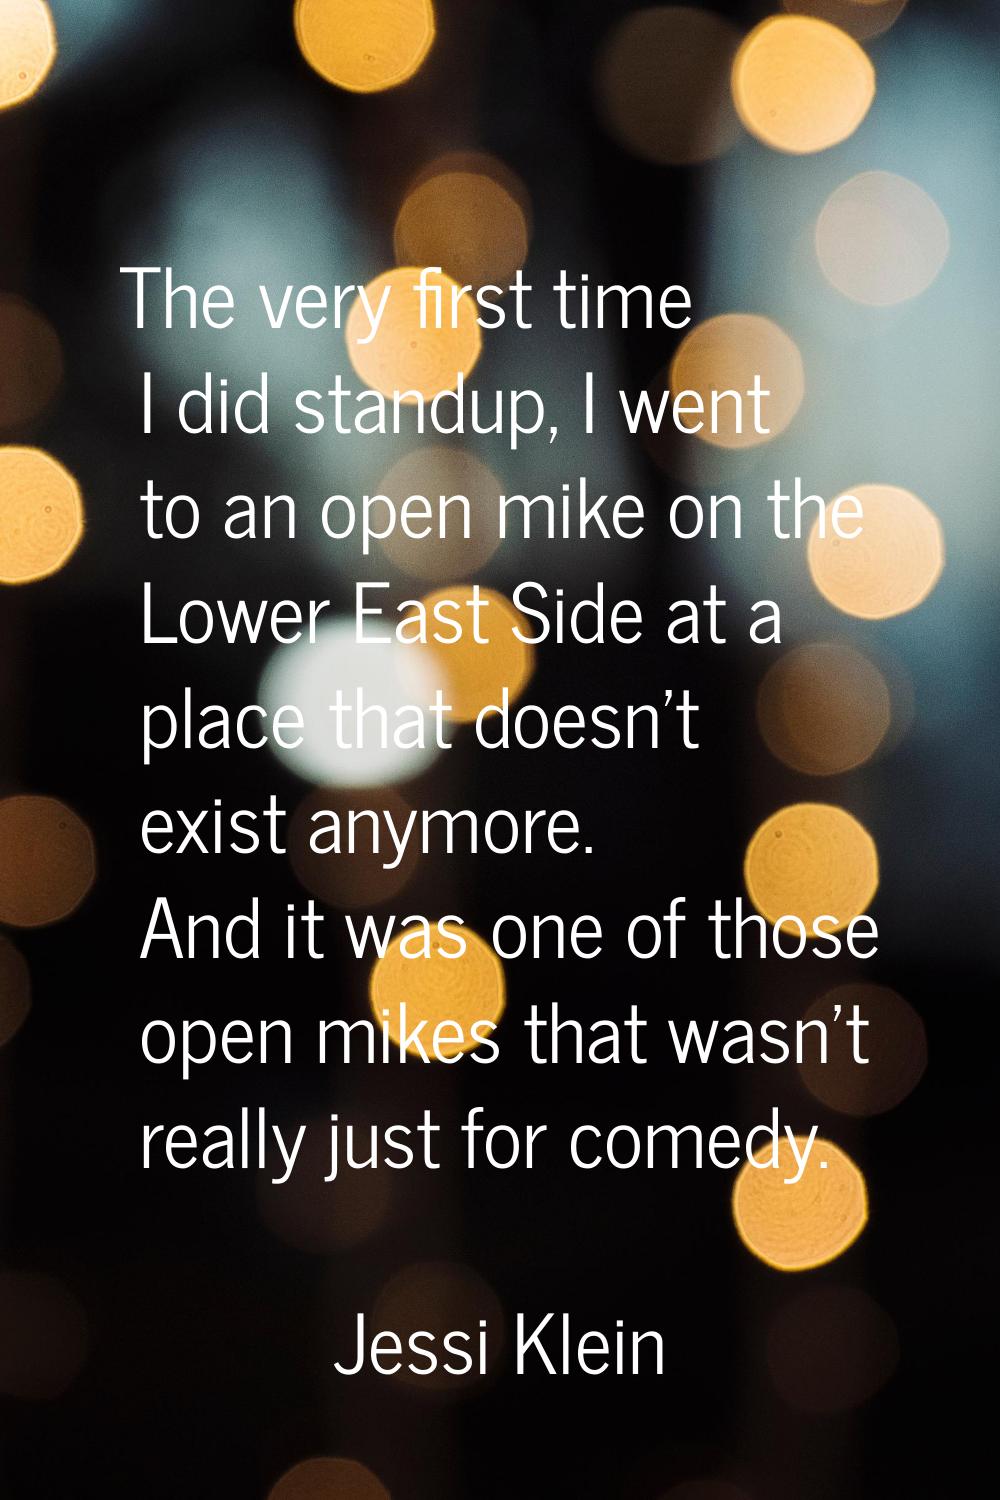 The very first time I did standup, I went to an open mike on the Lower East Side at a place that do